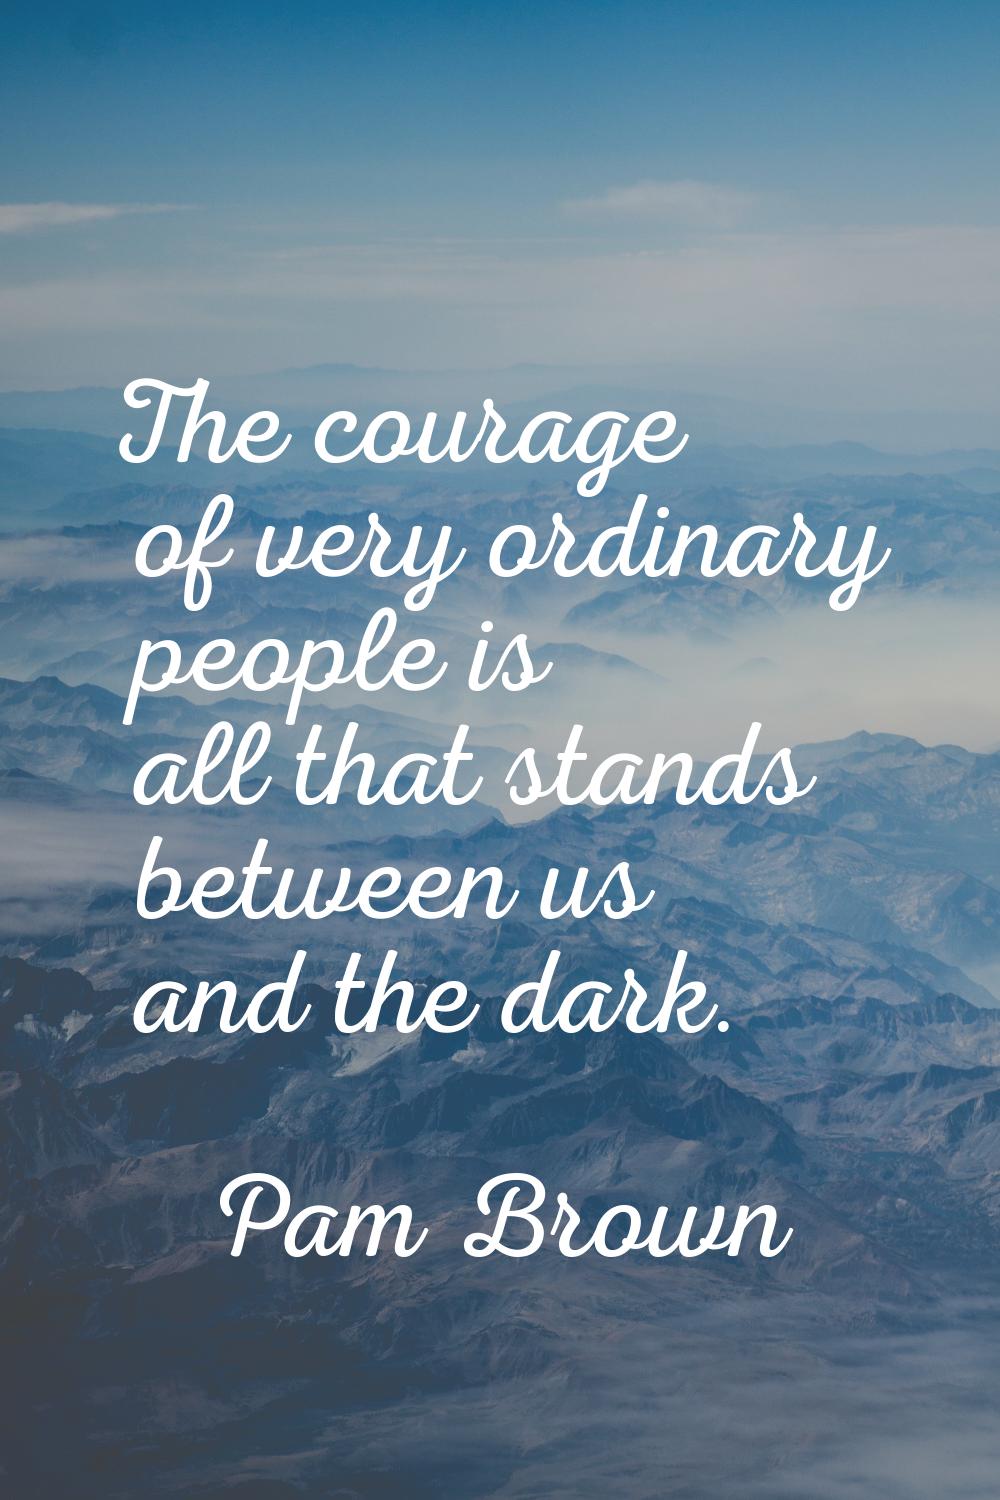 The courage of very ordinary people is all that stands between us and the dark.